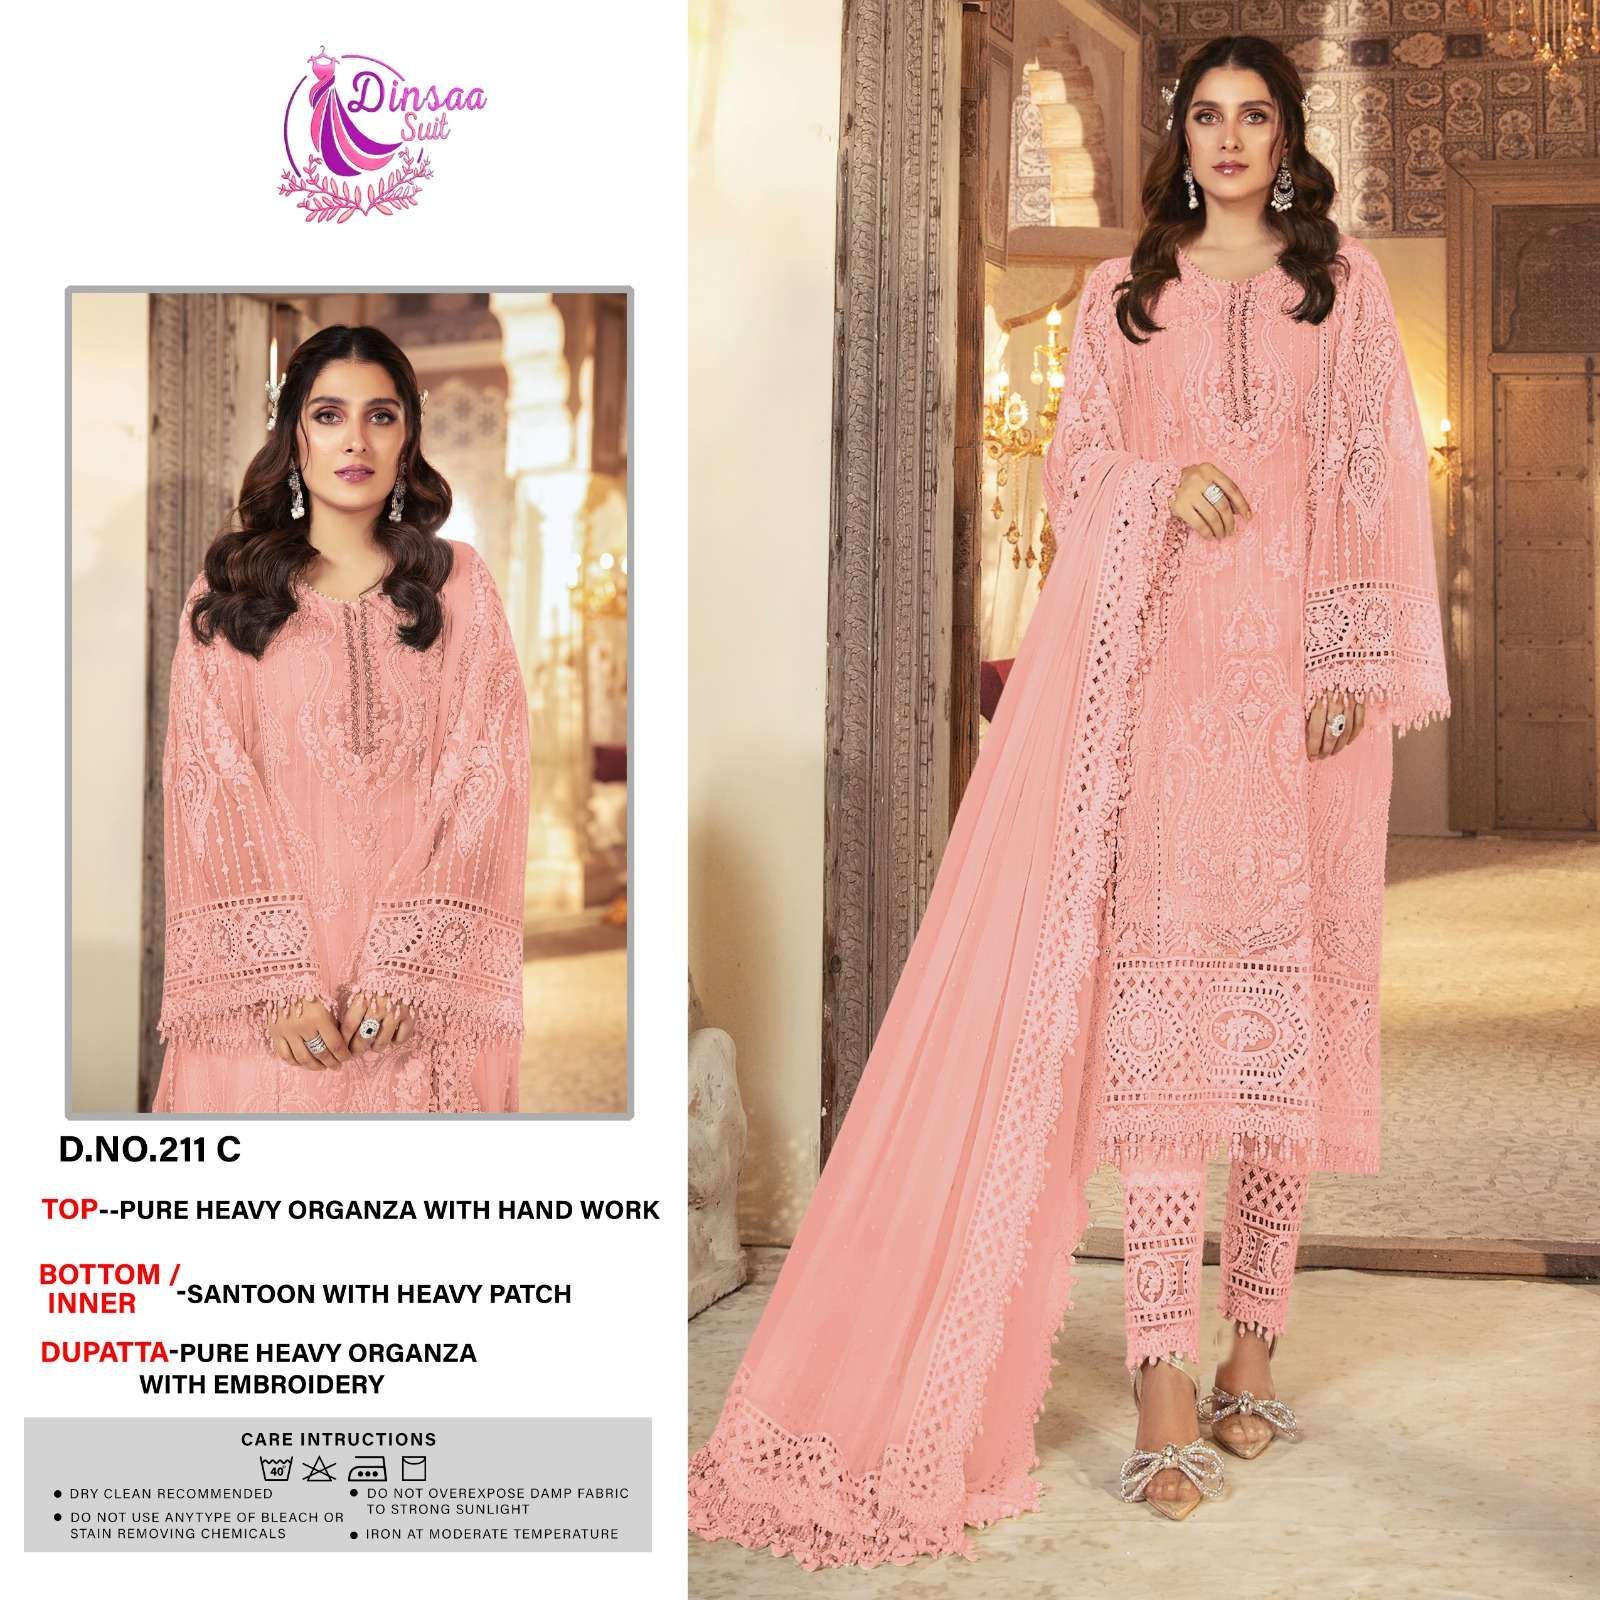 Dinsaa Hit Design 211 Colours By Dinsaa Suits 211-A To 211-D Series Beautiful Stylish Pakistani Suits Fancy Colorful Casual Wear & Ethnic Wear & Ready To Wear Heavy Organza Embroidery Dresses At Wholesale Price